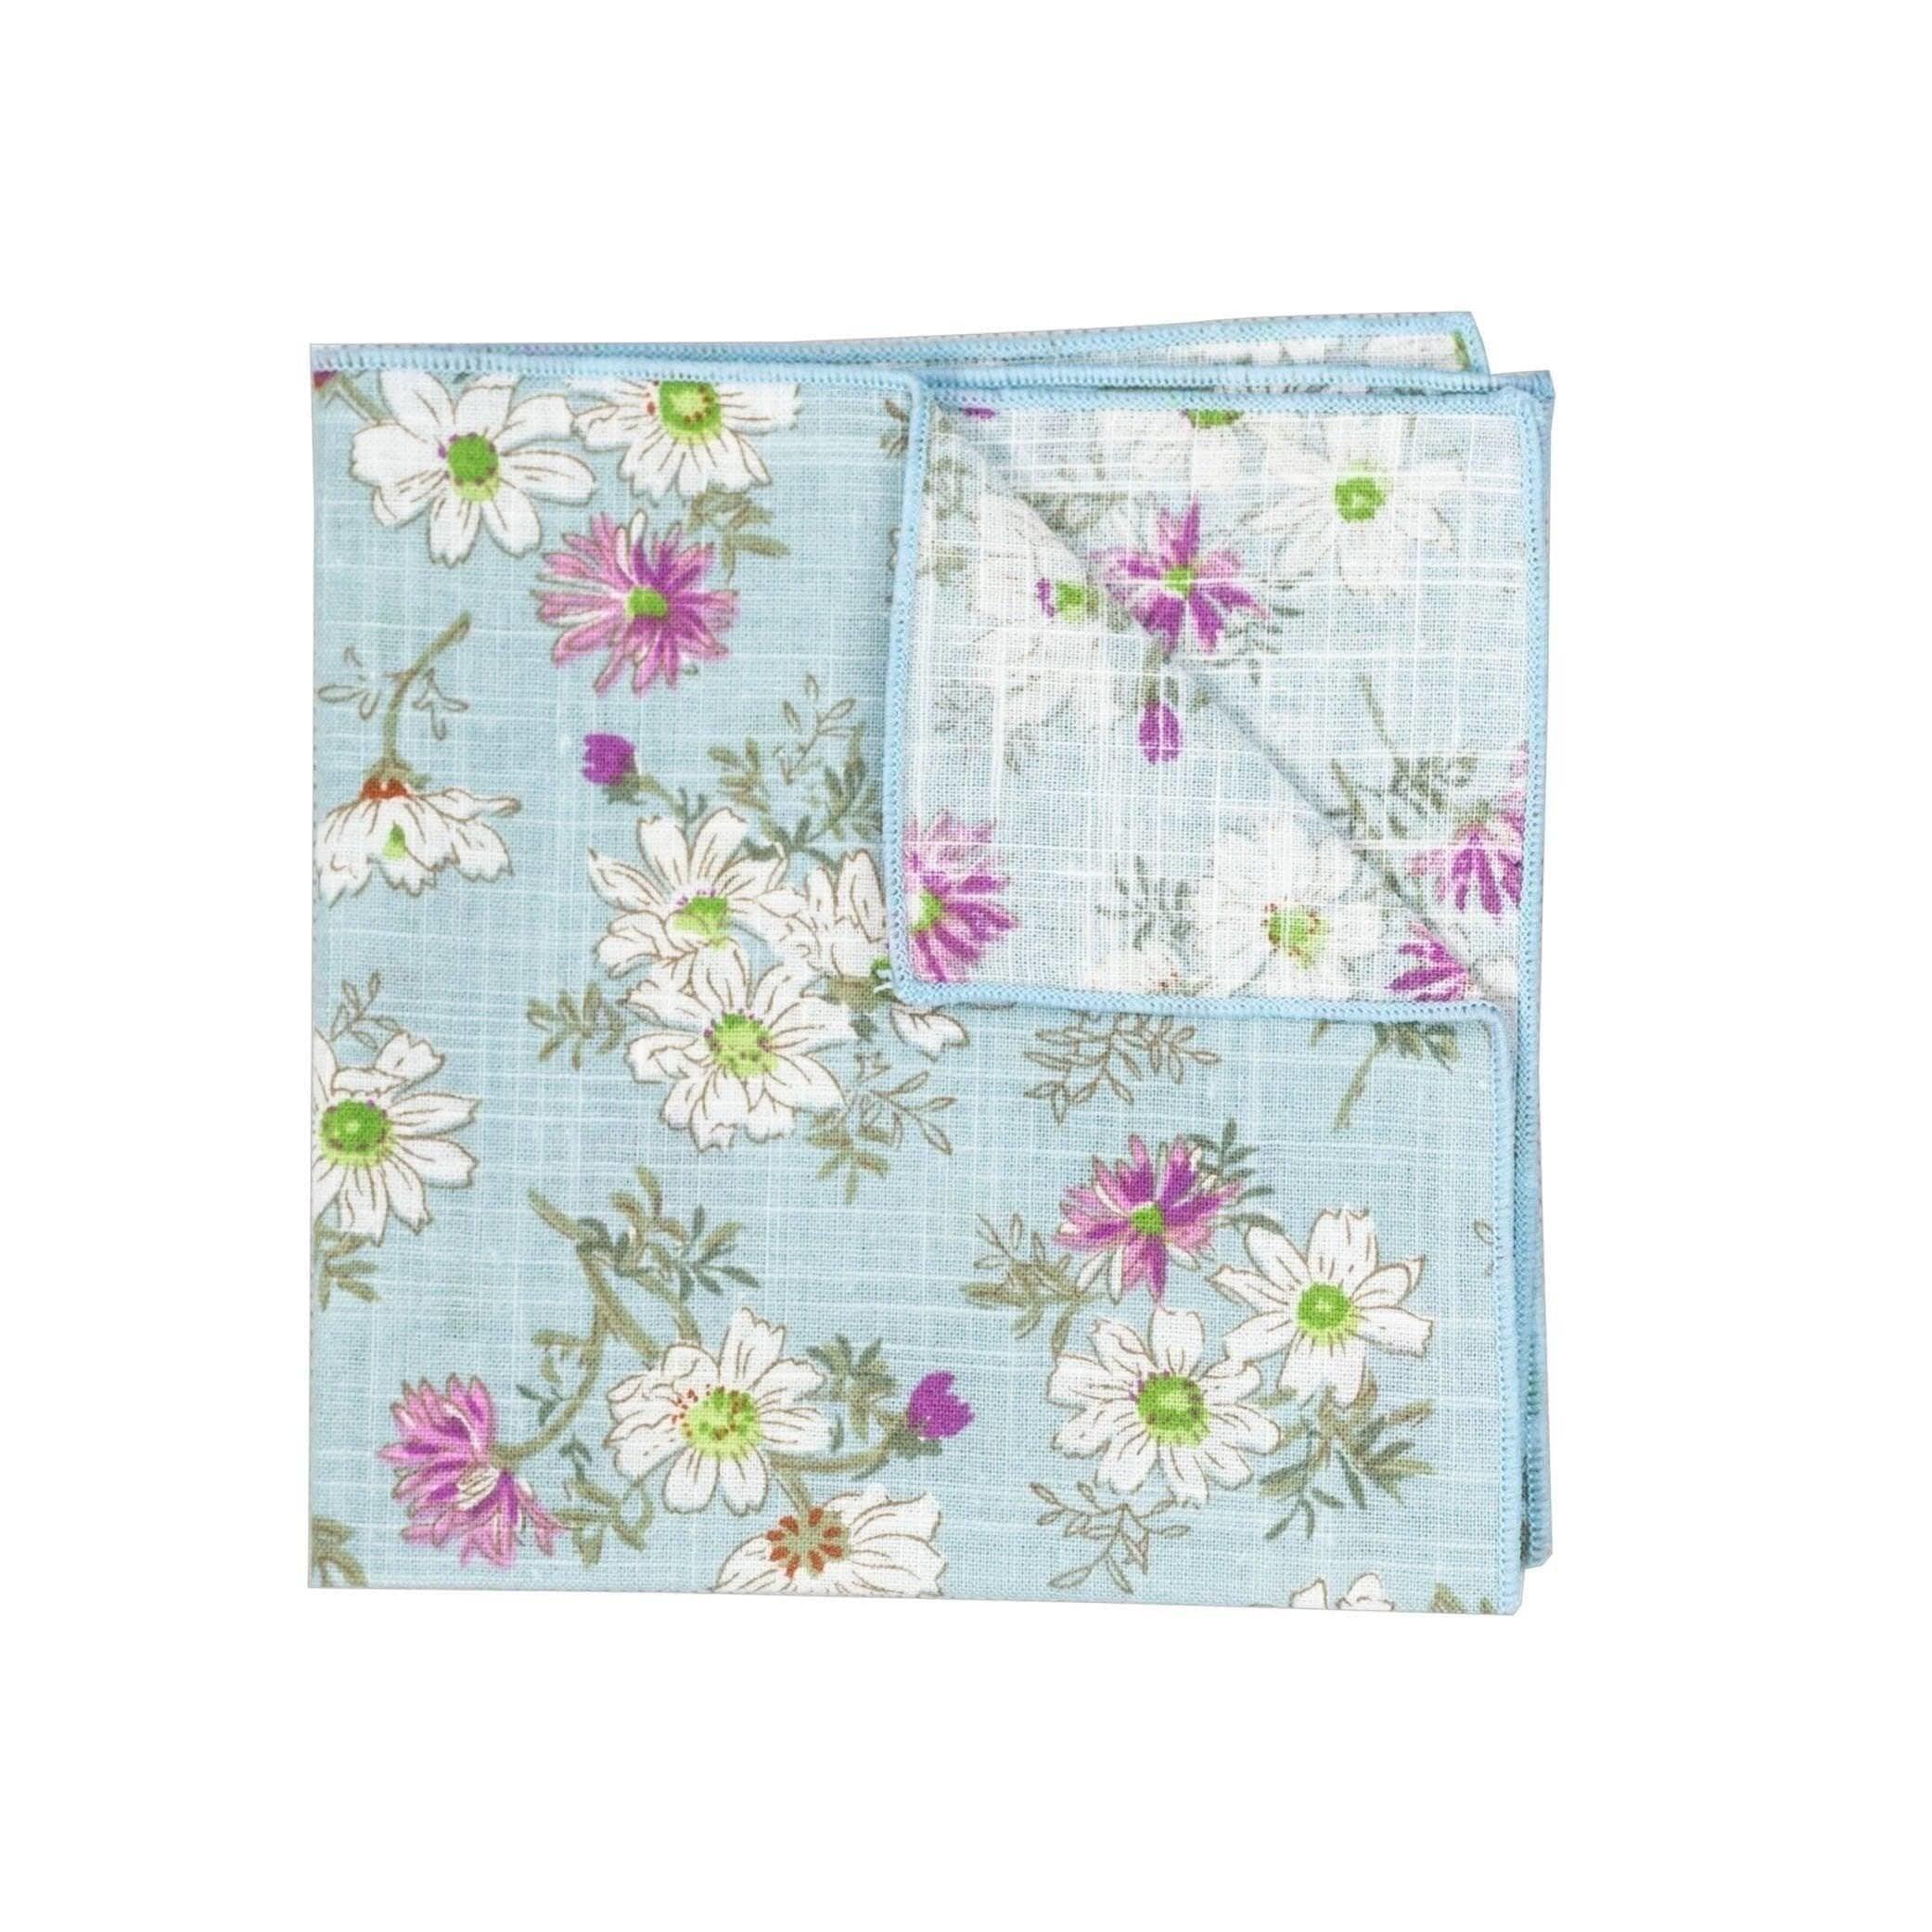 Light blue Floral Pocket Square JOSUE Mytieshop Light blue Floral Pocket Square Material CottonItem Length: 23 cm ( 9 inches)Item Width : 22 cm (8.6 inches) Great for: Groom Groomsmen Wedding Shoots Formal Prom Fancy Parties Gifts and presents Style shoots missions